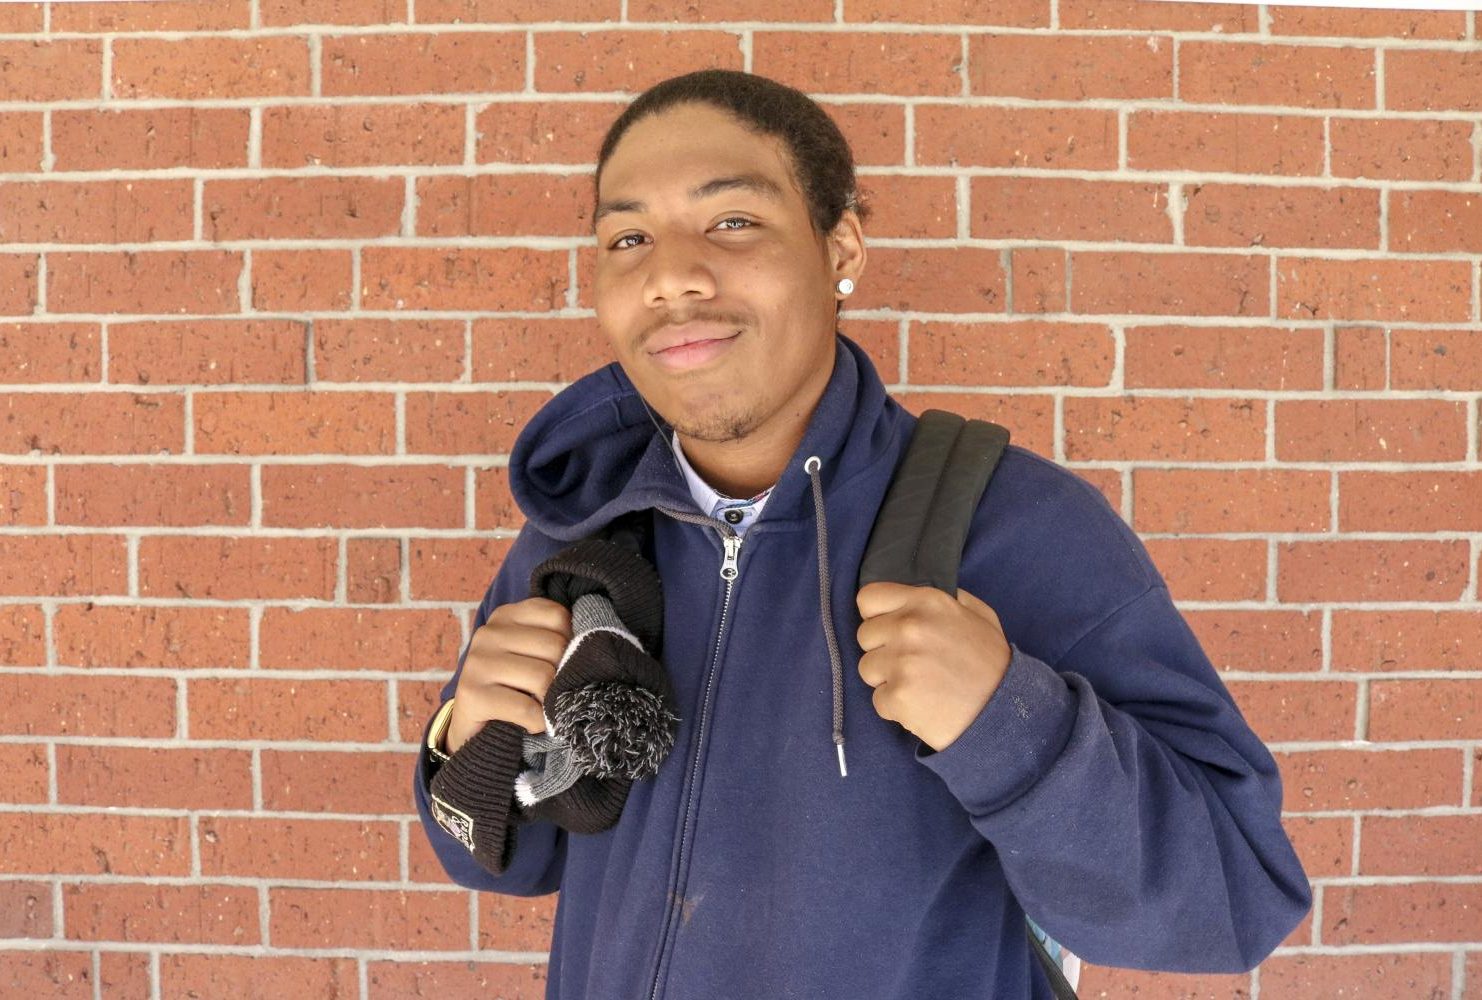 “I’m a martial artist and wearing more athletic clothes makes me feel more comfortable.” – David Stewart | Culinary Major